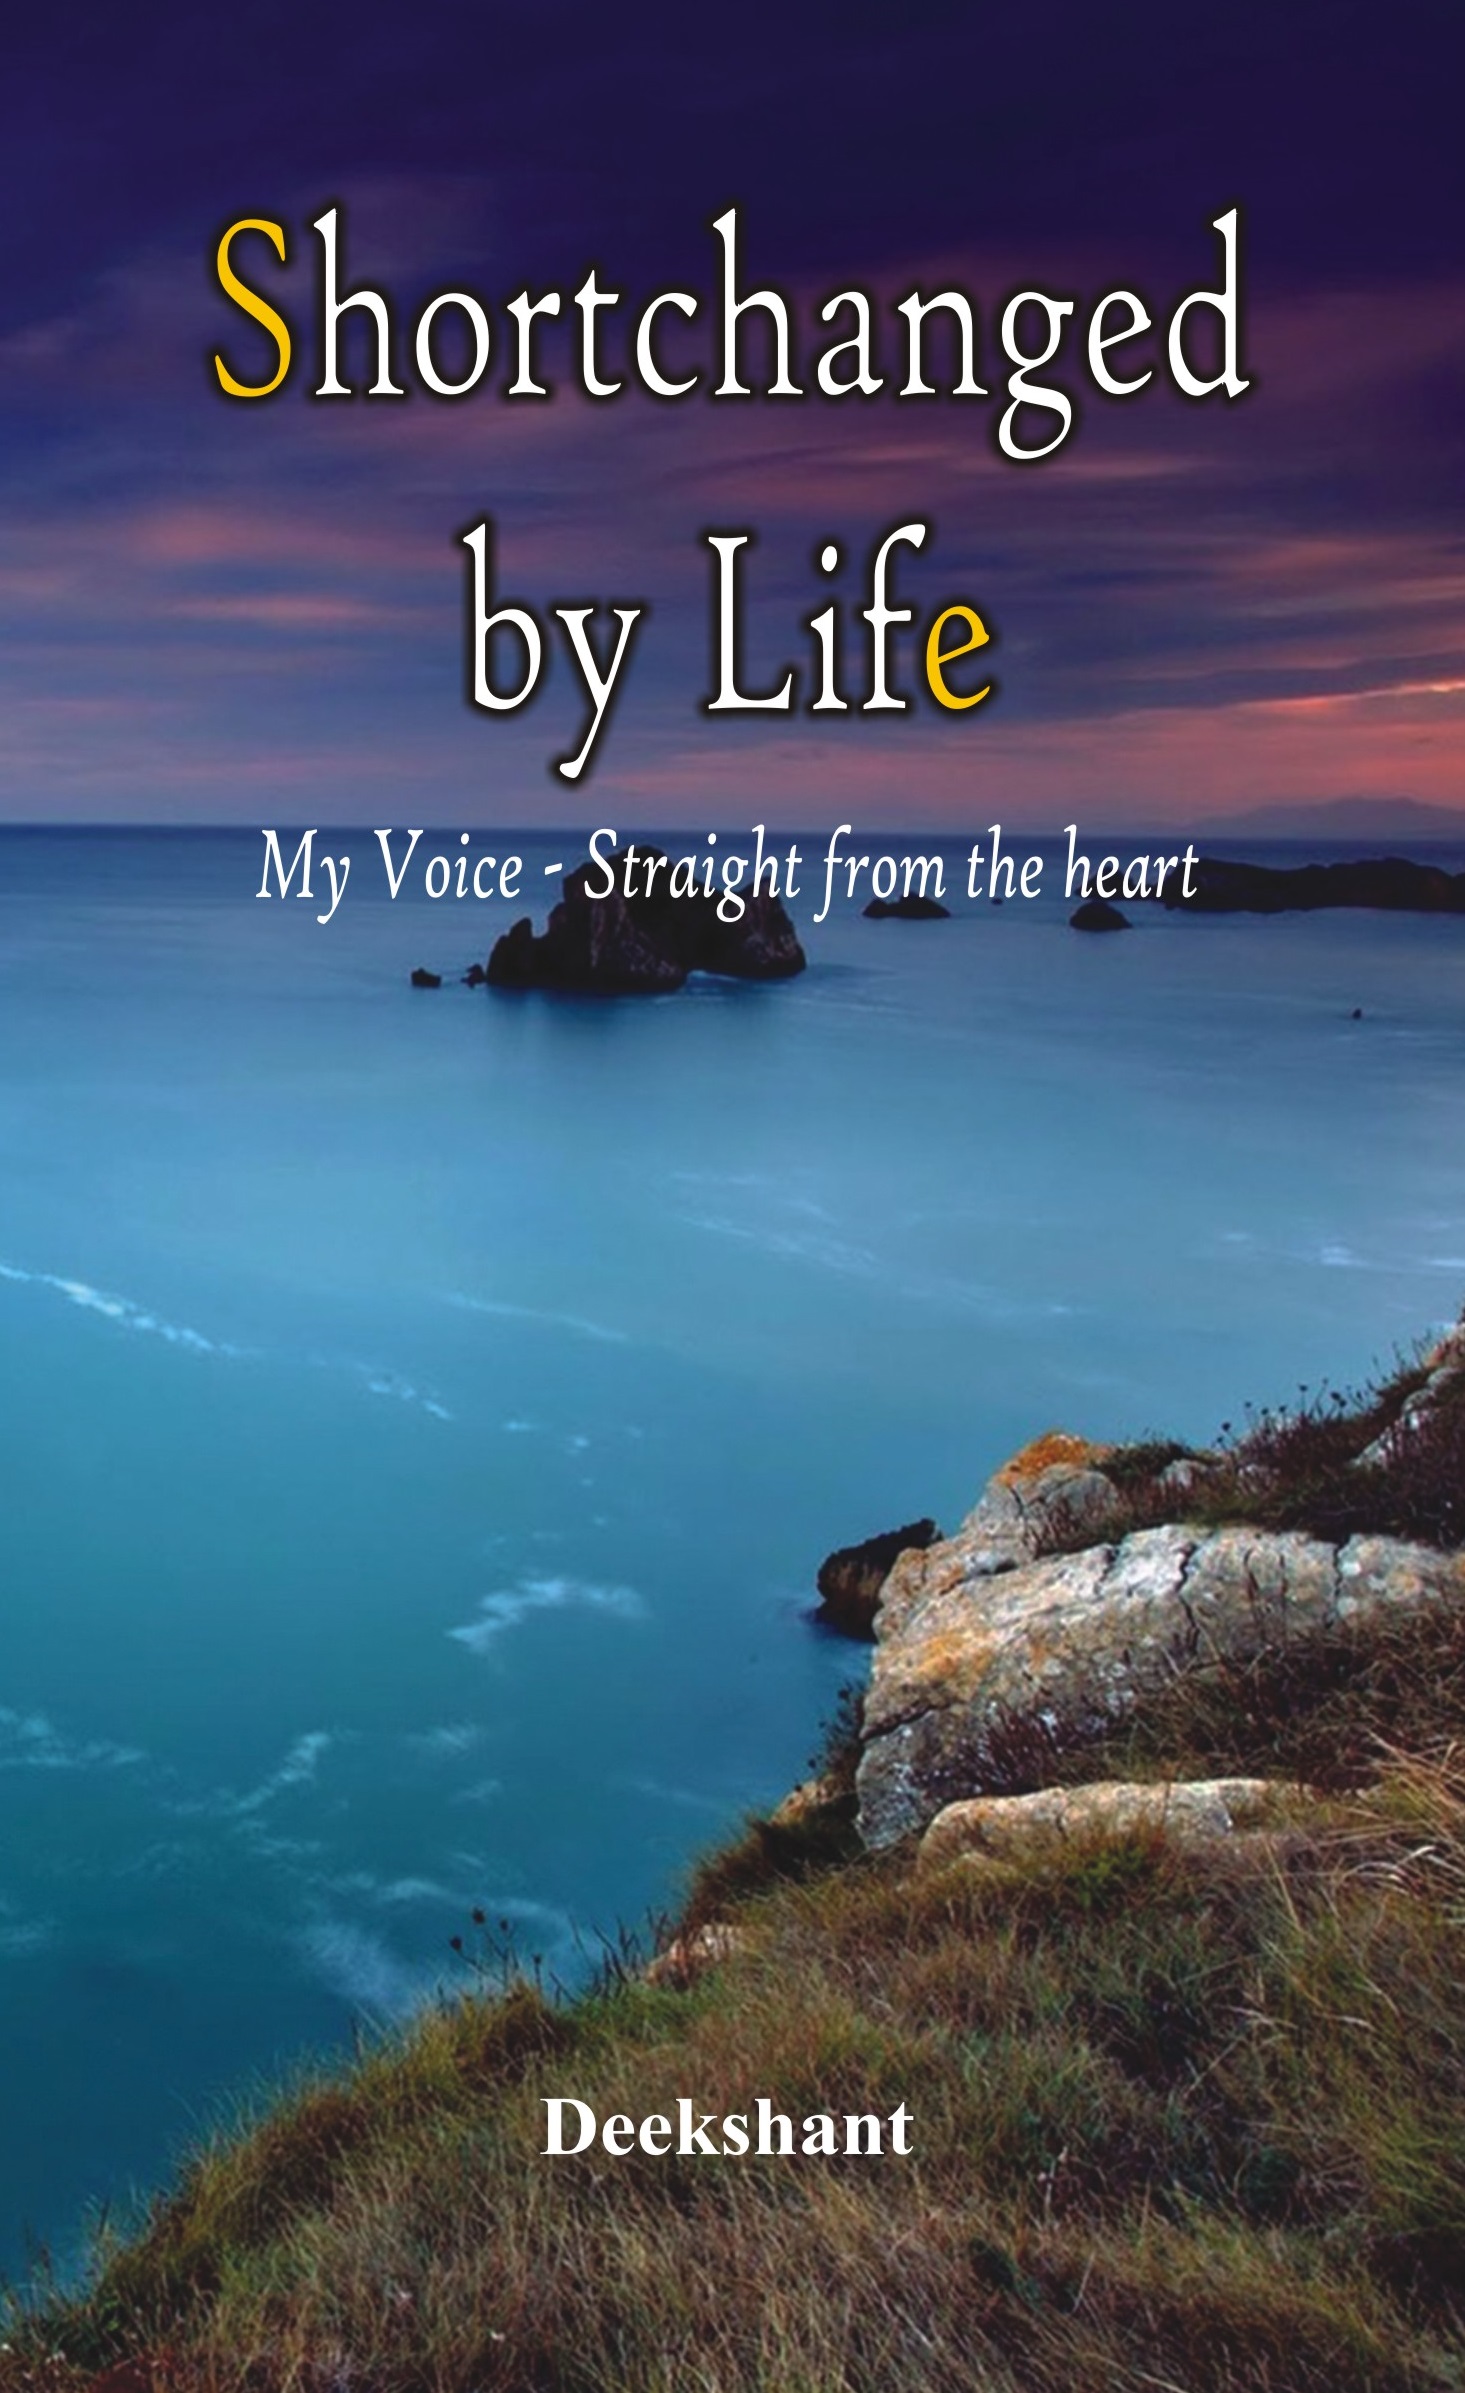 Short-changed by Life : My Voice - Straight from the heart